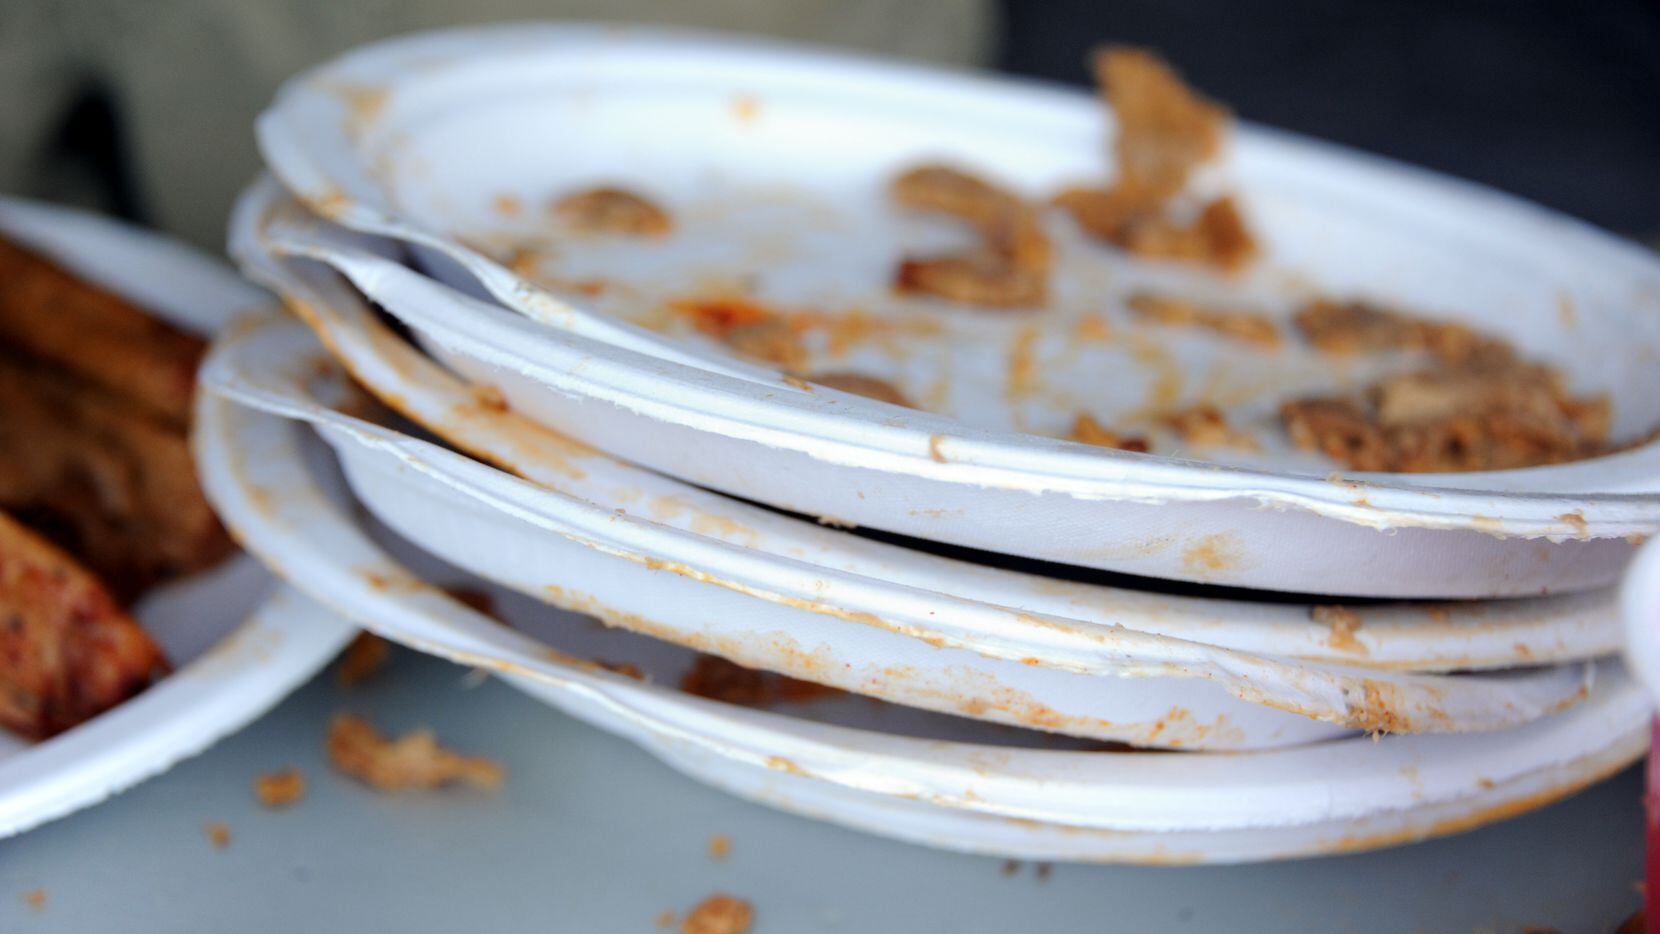 This is a stack of empty plates because Dallas came up empty in Esquire's list of best new...